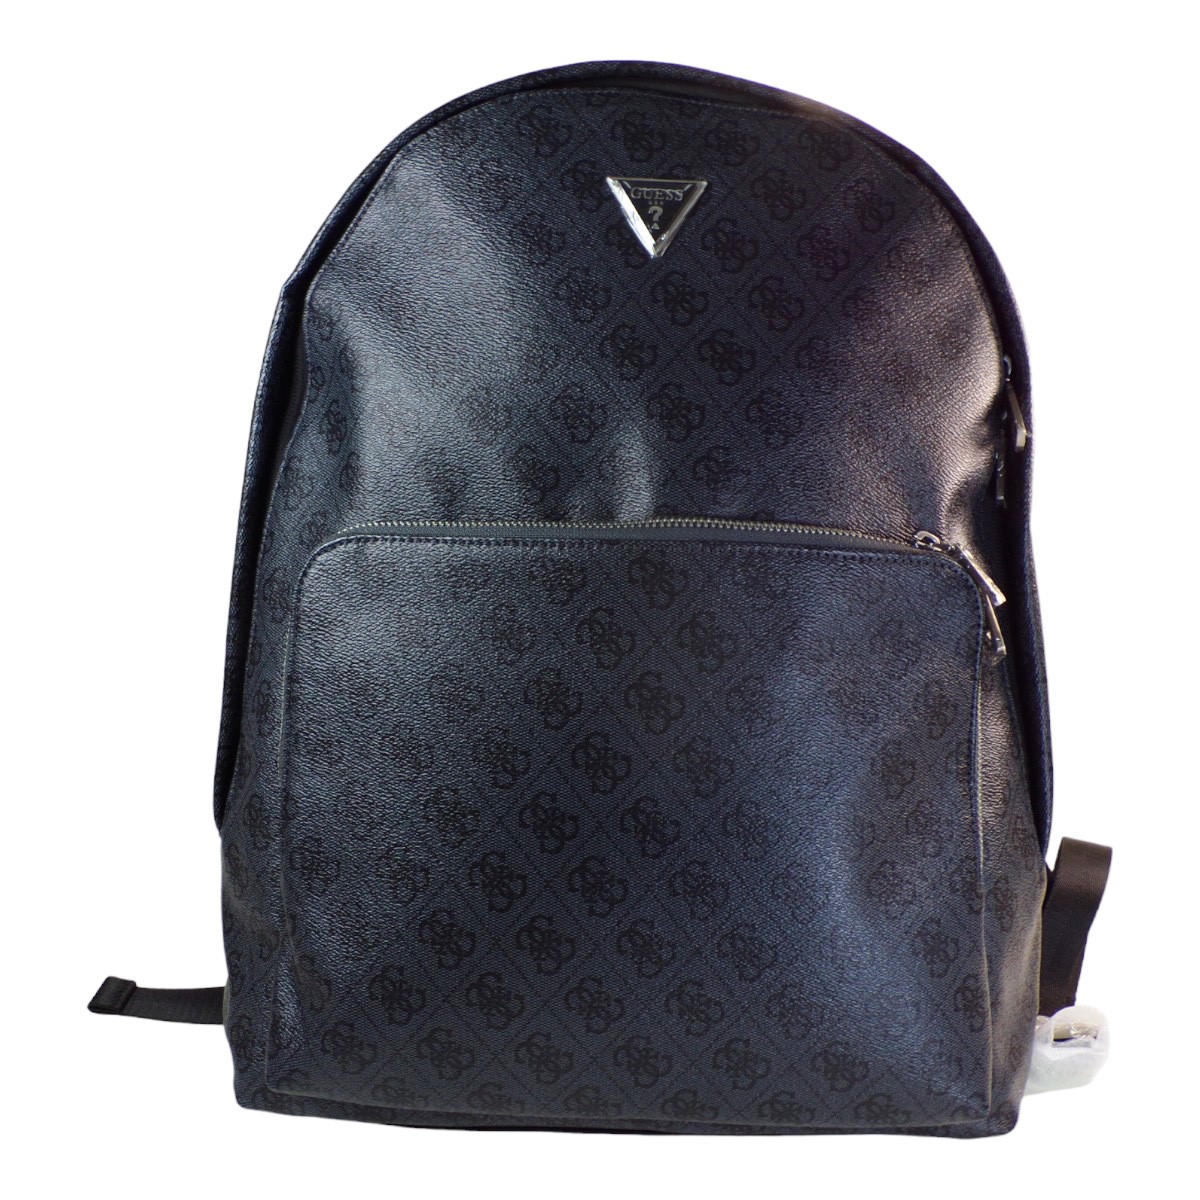 GUESS Τσάντες MILANO COMPACT ΑΝΔΡΙΚΕΣ Backpack Πλάτης HMEVZLP3406-ΒLK Μαύρο-Γκρί HMEVZLP3406-ΒLK Μαύρο-Γκρί